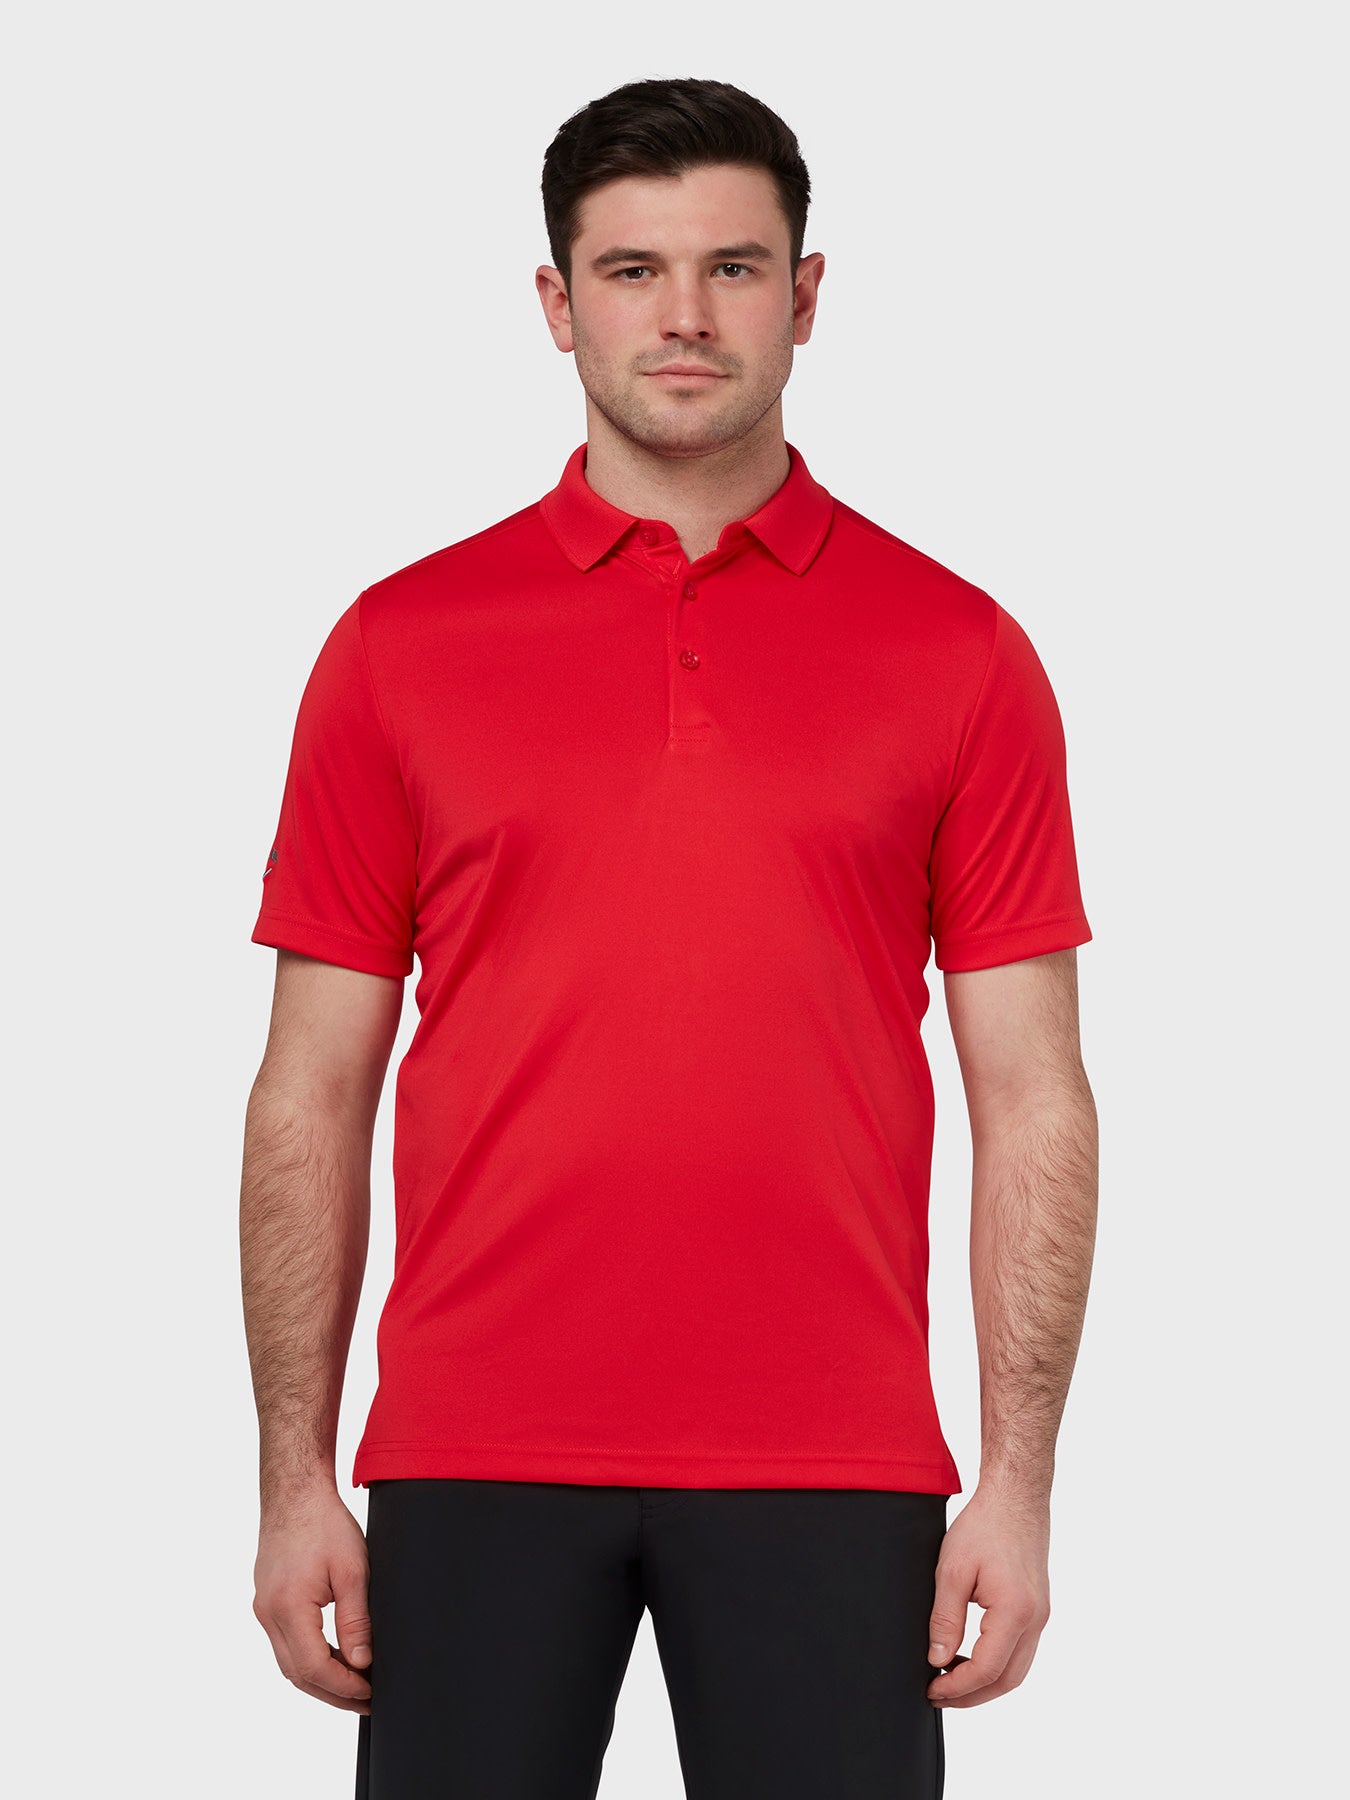 View Tournament Polo In True Red True Red XS information